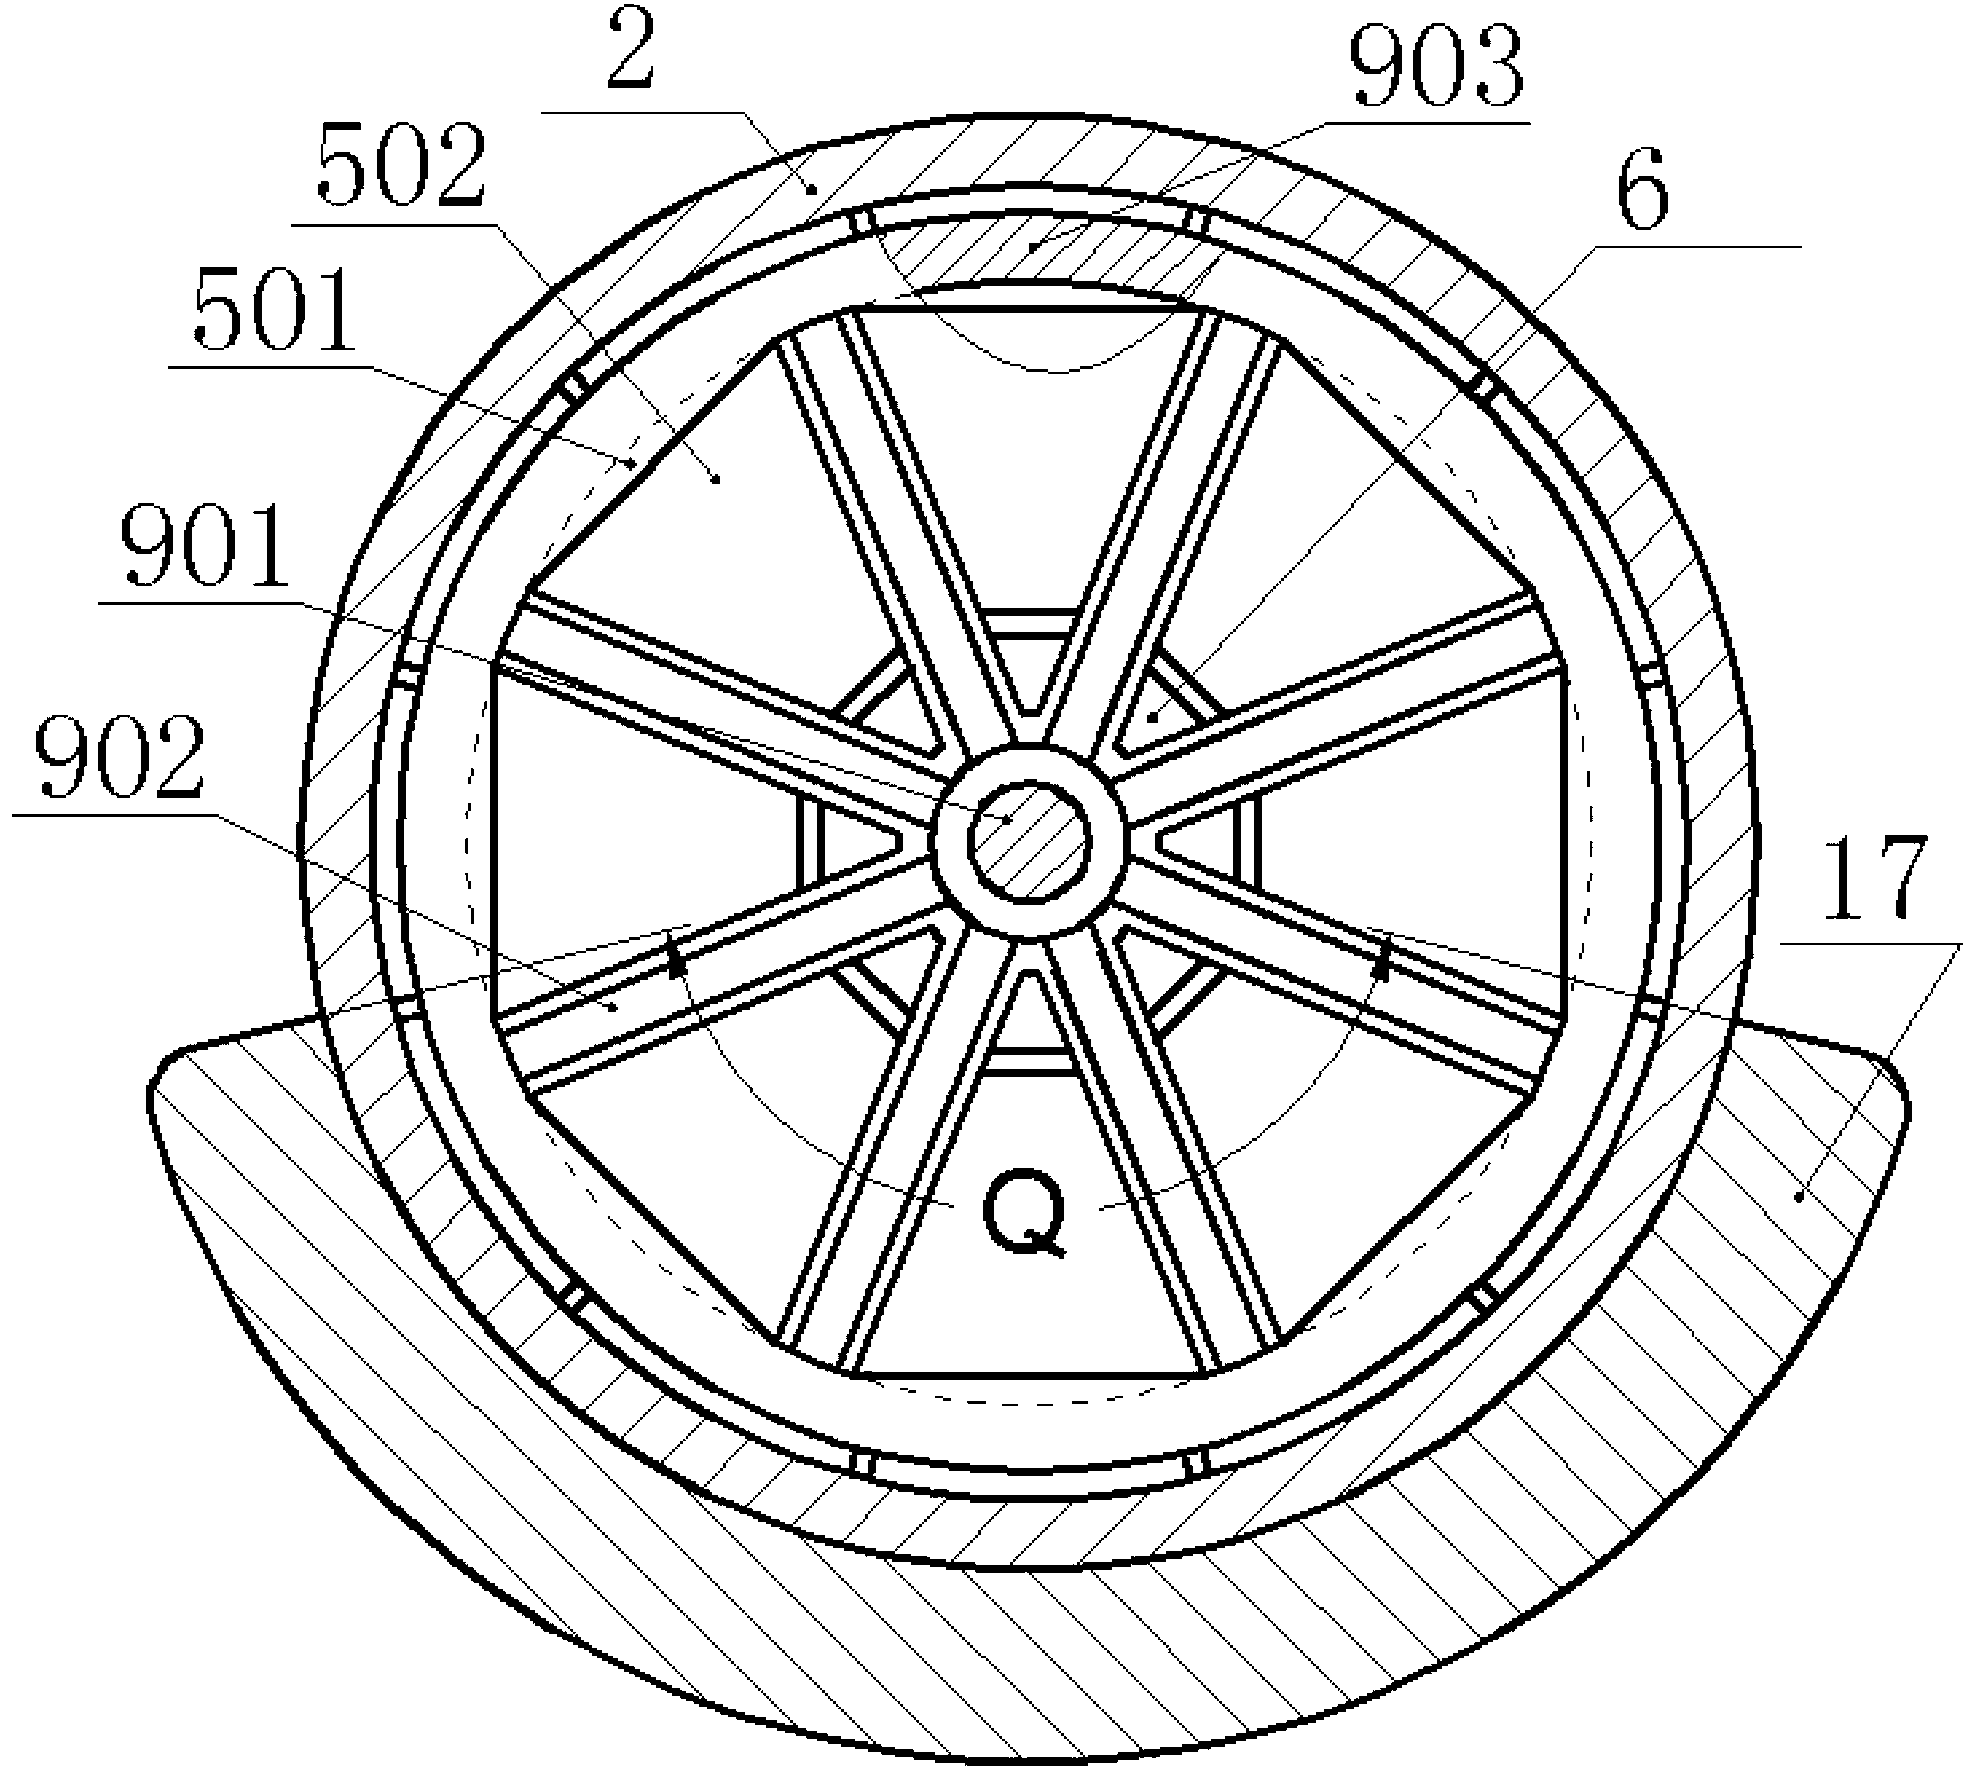 Overhanging type rotating generator based on piezoelectric cantilever mutual excitation